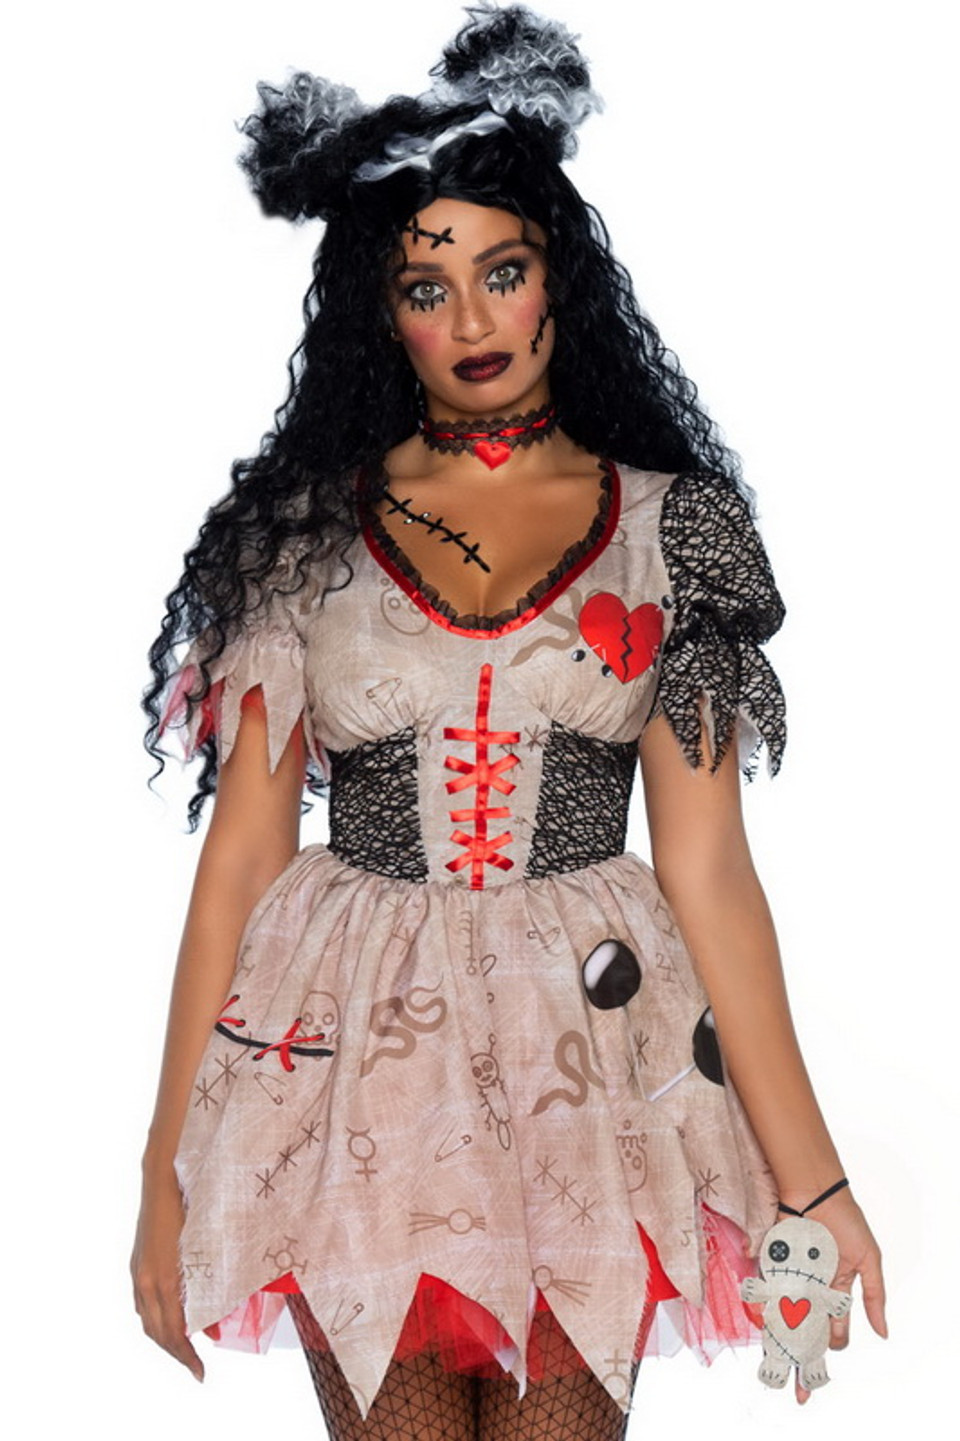 Haunted Doll Costume - Spicy Lingerie